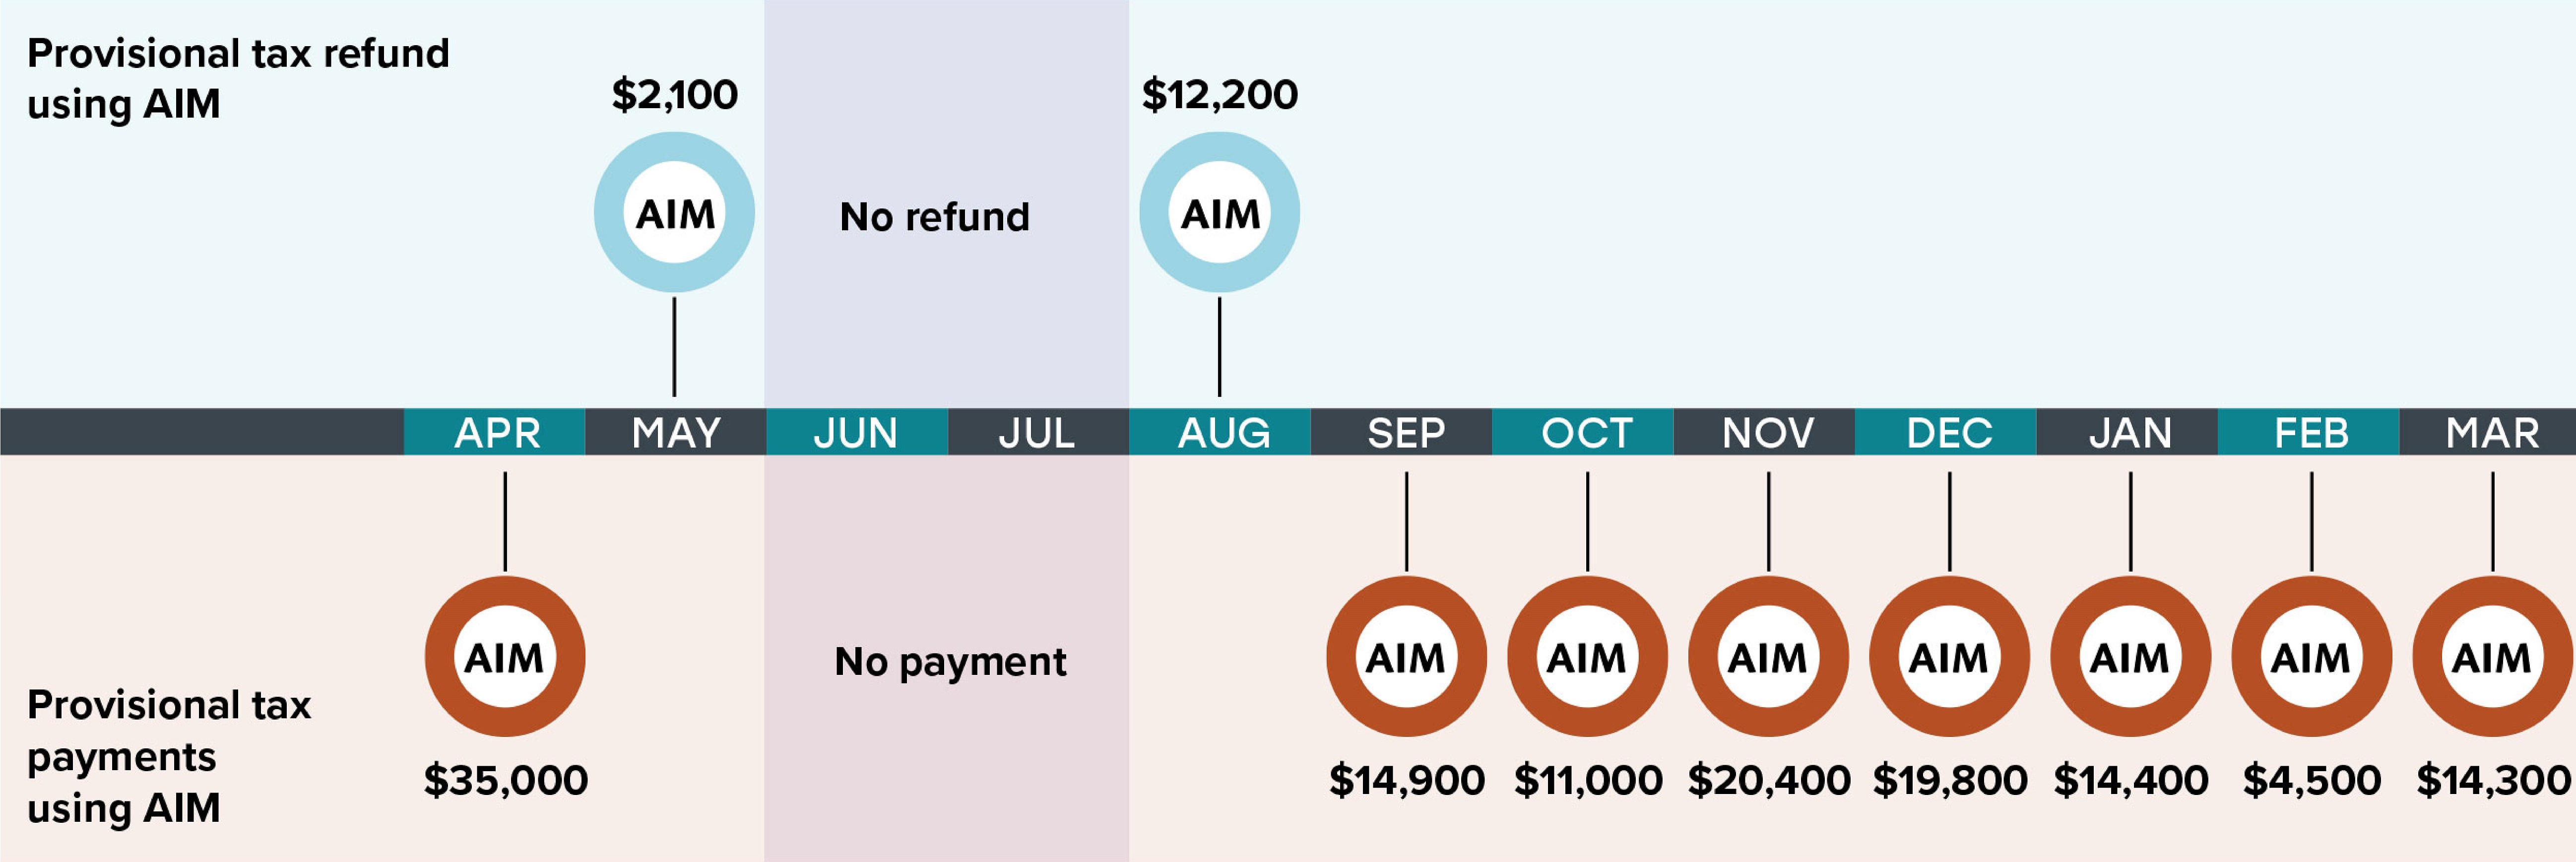 April to March timeline of Lydia’s year using AIM. Lydia gets the following refunds for the months without any profit, 2,100 in May, and 12,200 in August. Lydia pays the following provisional tax amounts for months she makes a profit, 35,000 in April, 14,900 in September, 11,000 in October, 20,400 in November, 19,800 in December, 14,400 in January, 4,500 in February, and 14,300 in March. In June and July there was no refund or payment.